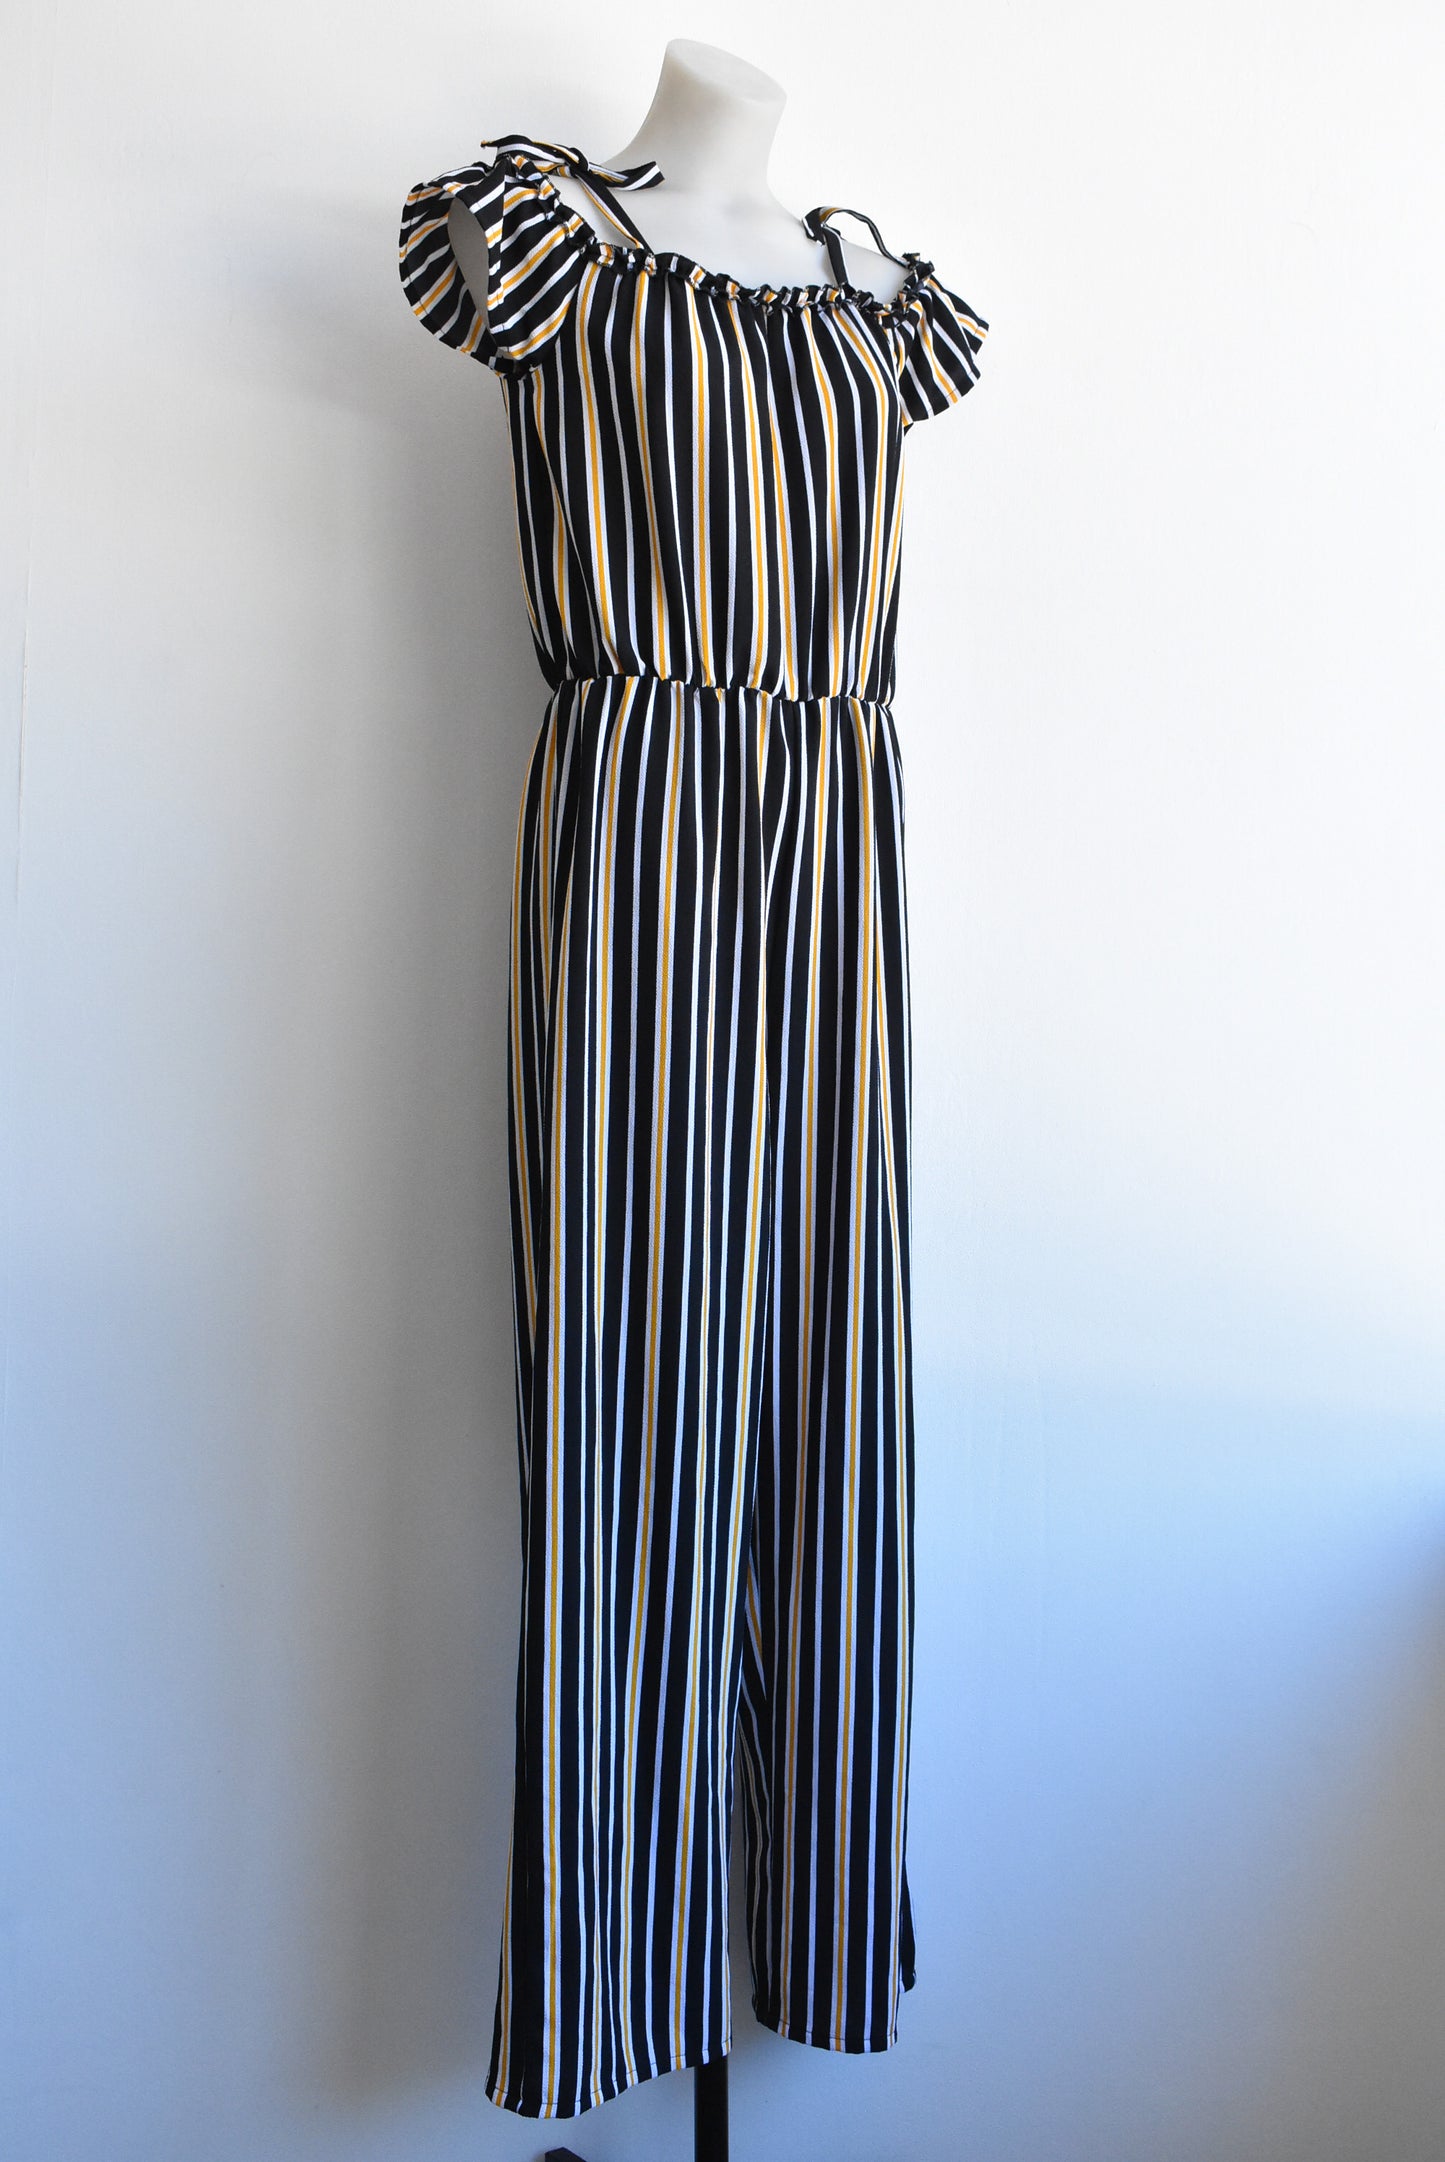 Switch Girls off-the-shoulder black/orange striped jumpsuit, size 16yrs (likely fit size 6/8 adult)